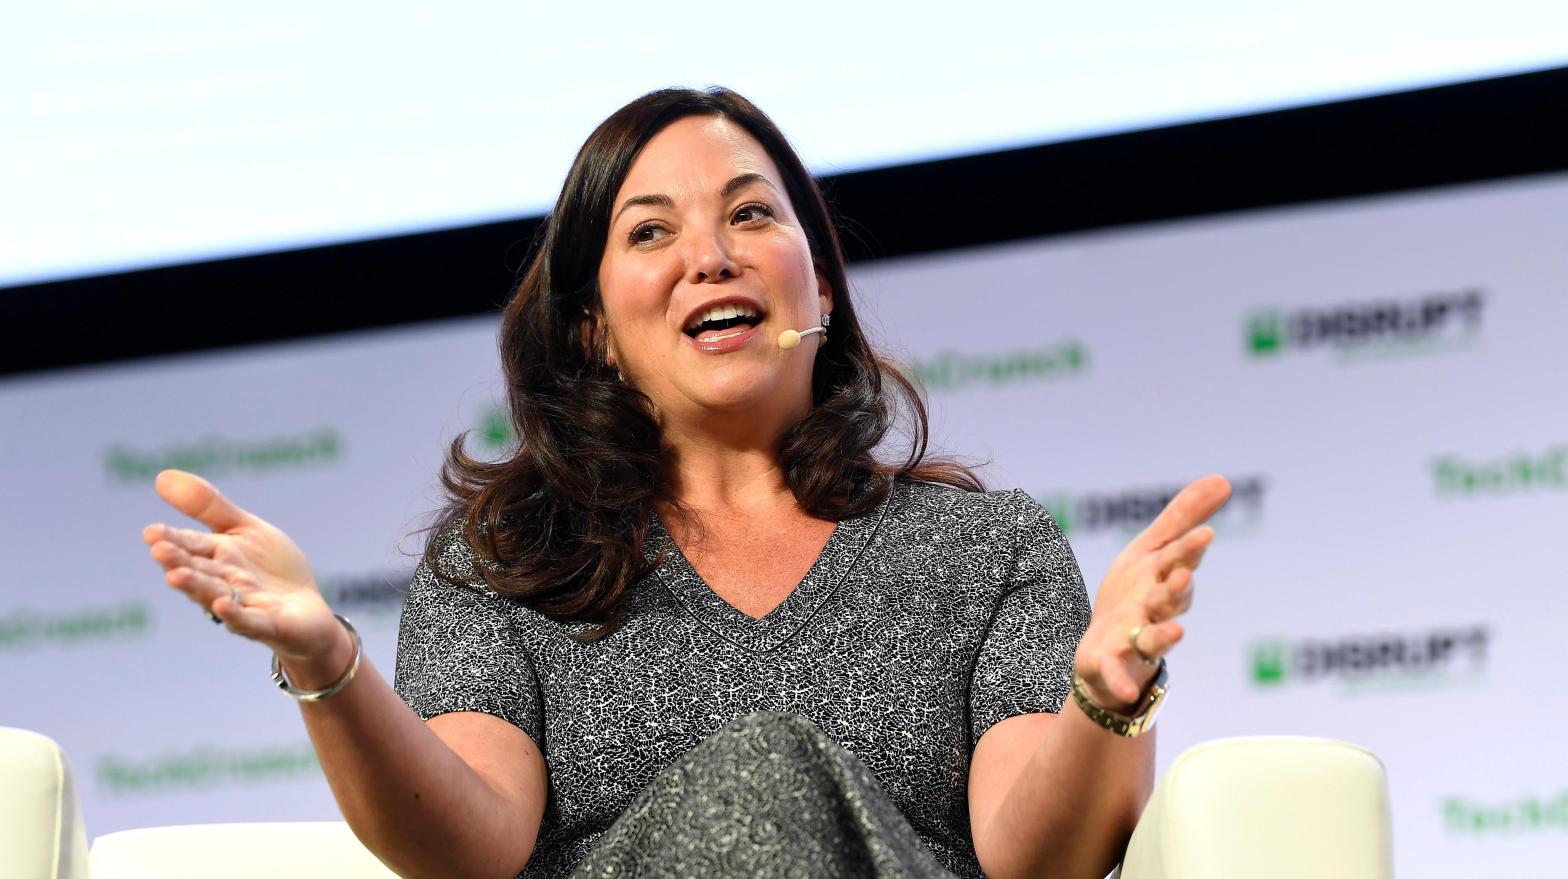 PagerDuty CEO Jennifer Tejada put her foot in her mouth. (Photo: Steve Jennings, Getty Images)